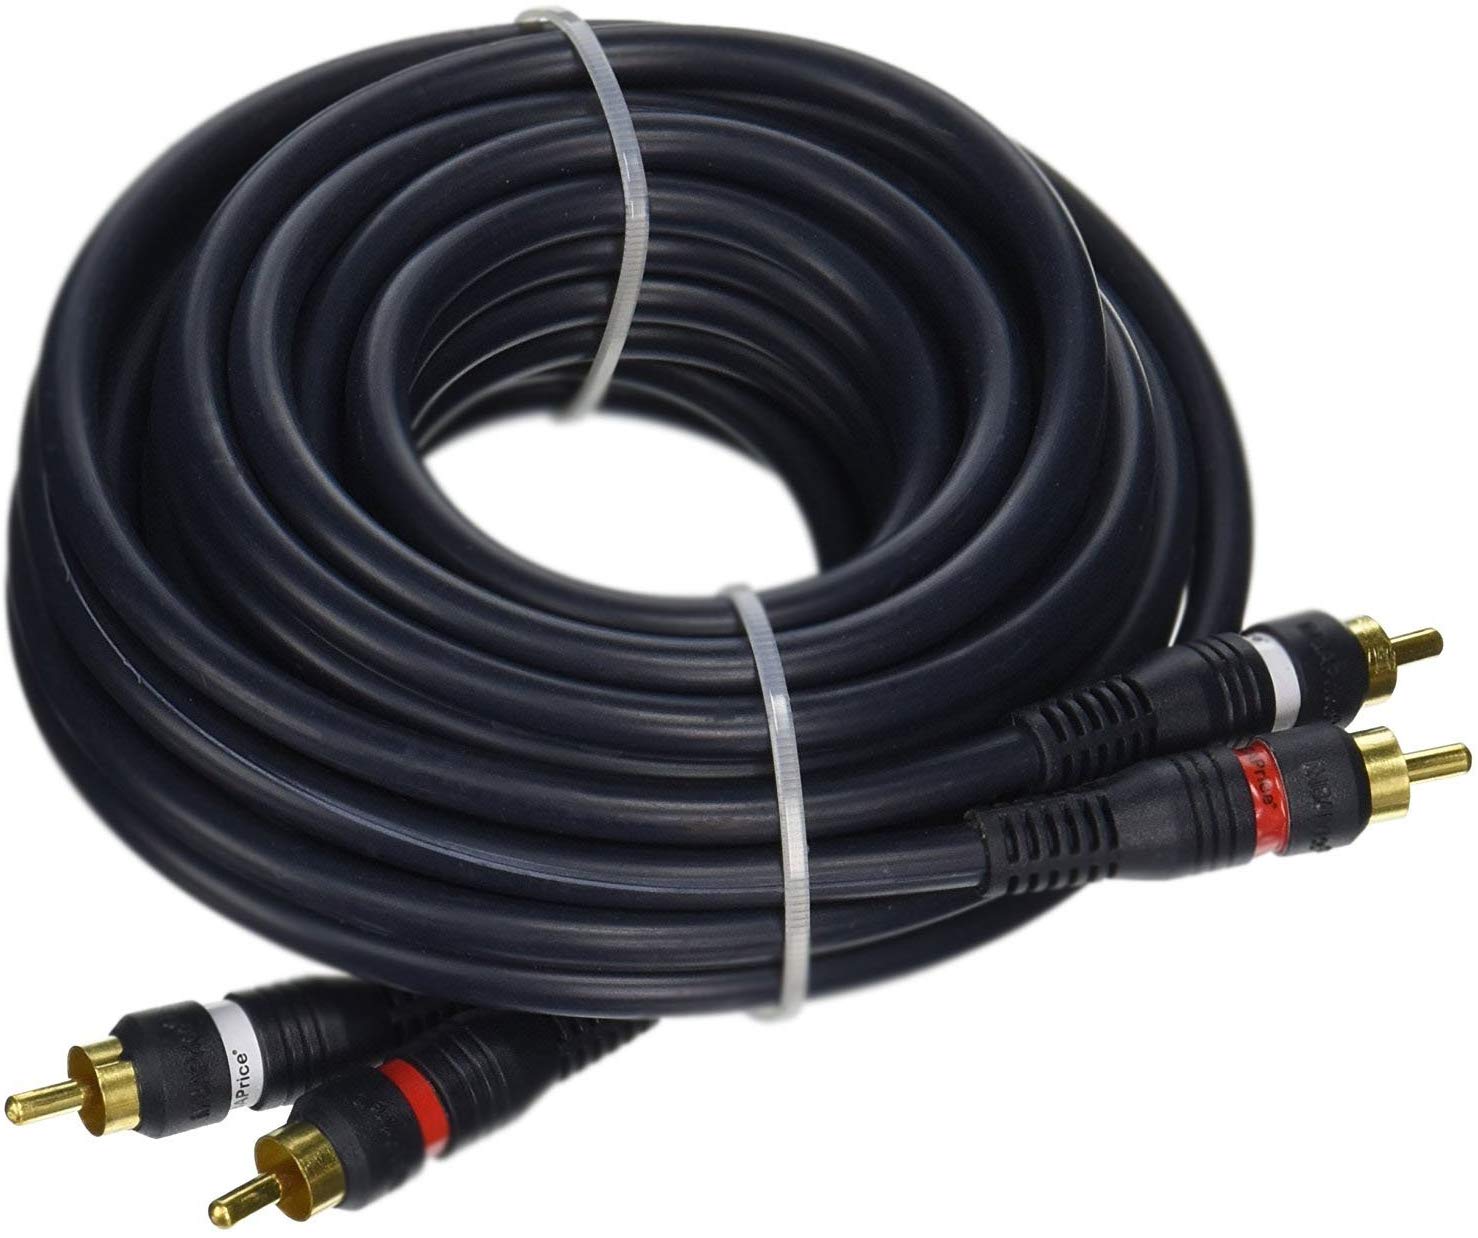 iMBAPrice  2RCA Male to 2RCA Male Home Theater Audio Cable - 25 Feet - Black - image 1 of 4